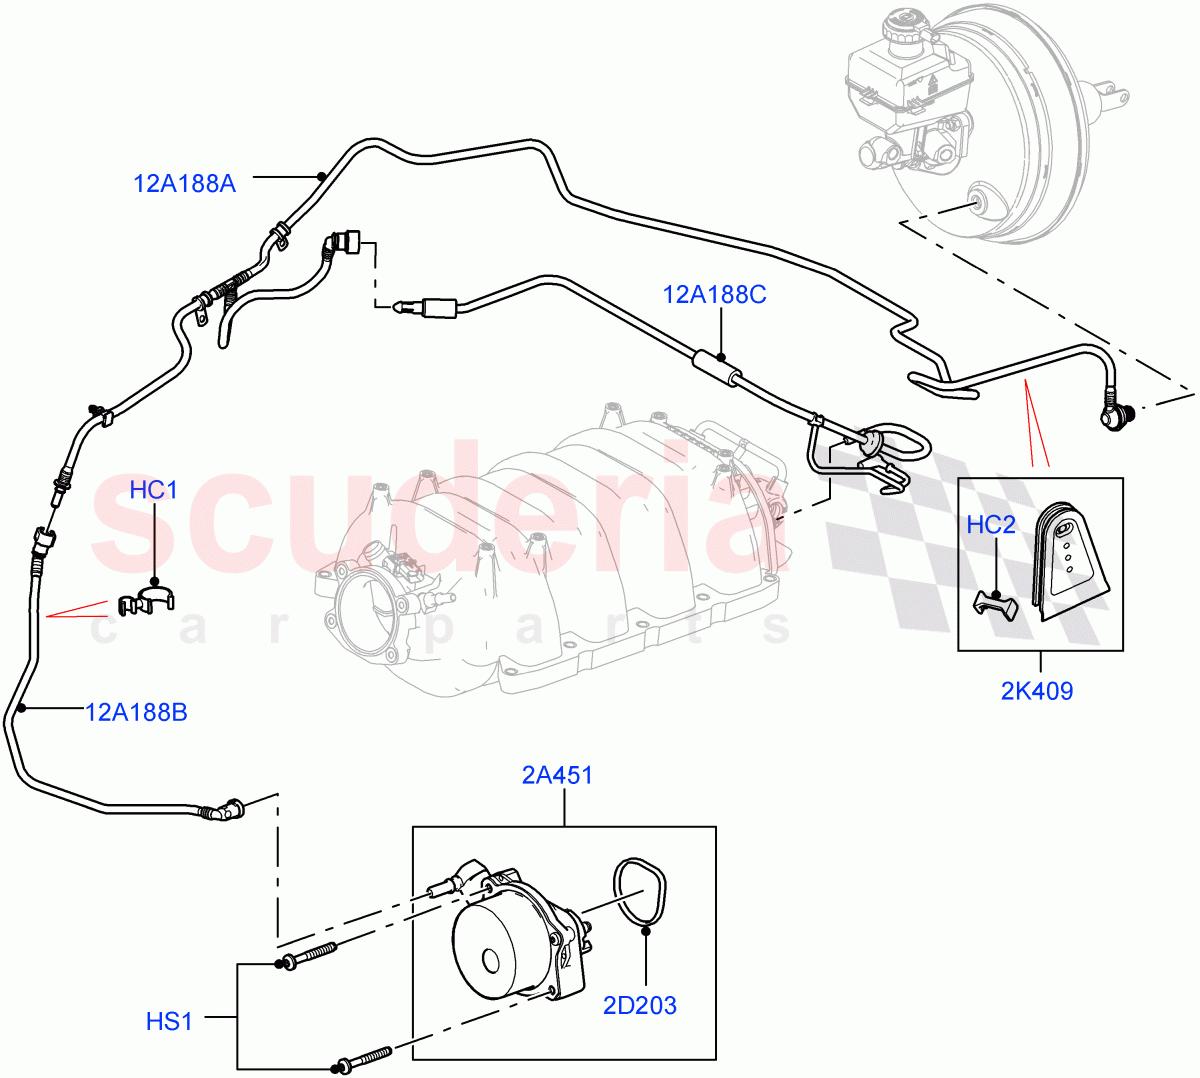 Vacuum Control And Air Injection(5.0L OHC SGDI NA V8 Petrol - AJ133)((V)FROMAA000001) of Land Rover Land Rover Range Rover Sport (2010-2013) [5.0 OHC SGDI NA V8 Petrol]